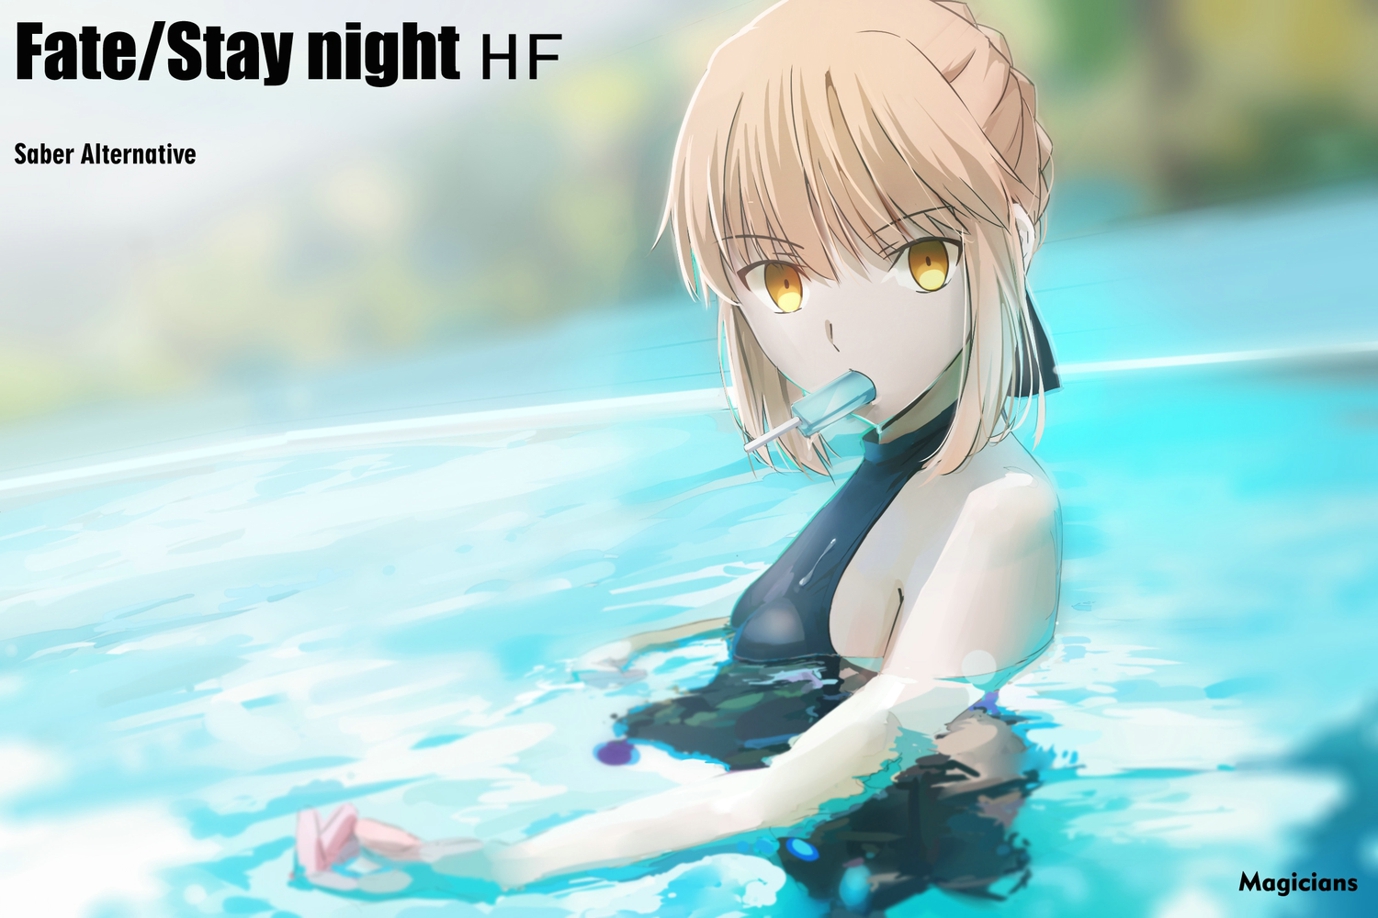 Saber Fate Series Fate Grand Order Saber Alter In Water Fate Stay Night Fate Stay Night Heavens Feel 1378x918